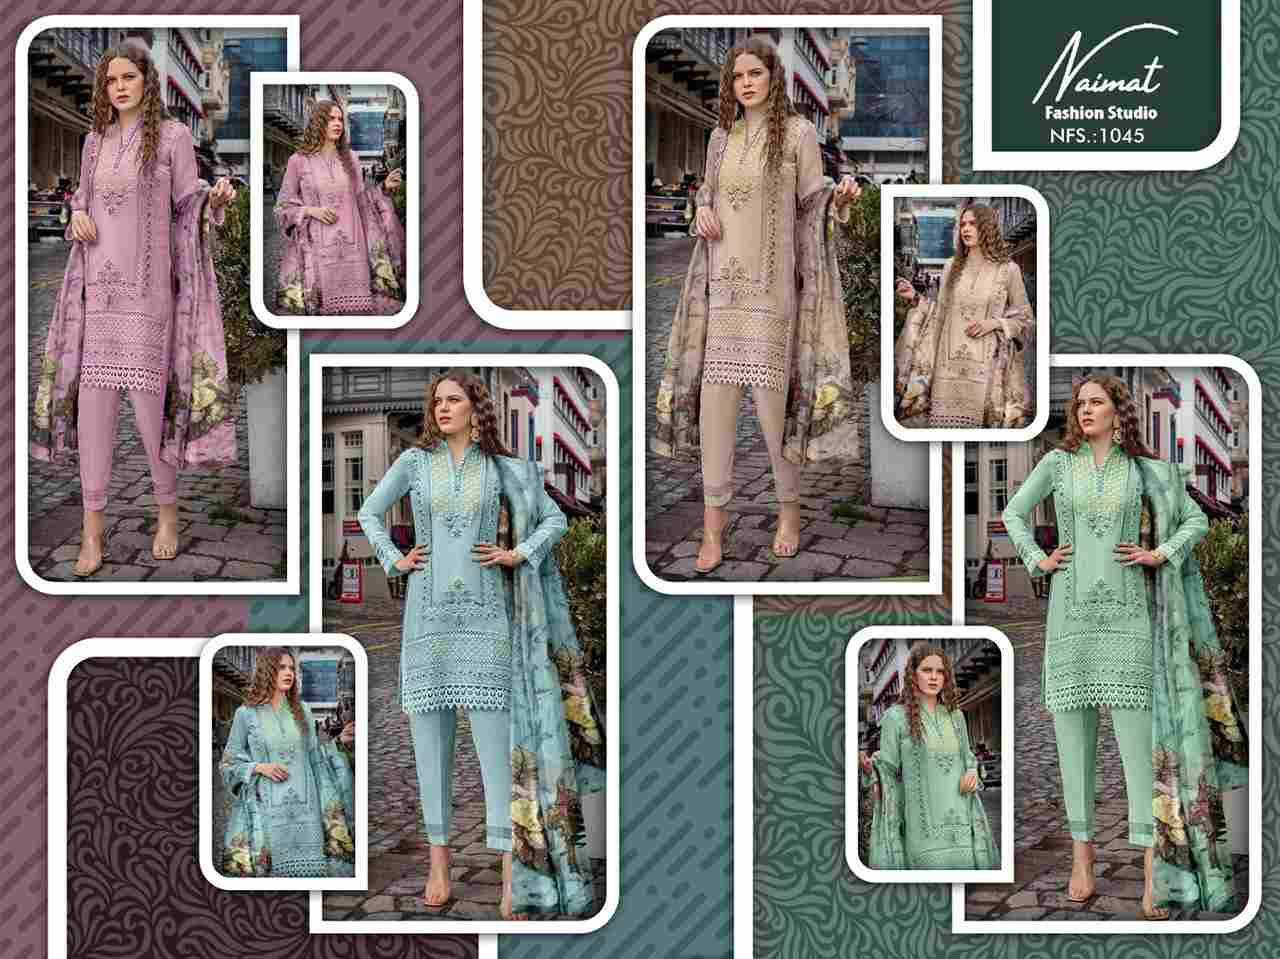 Naimat 1045 Colours By Naimat Fashion Studio 1045-A To 1045-D Series Beautiful Festive Suits Colorful Stylish Fancy Casual Wear & Ethnic Wear Pure Faux Dresses At Wholesale Price